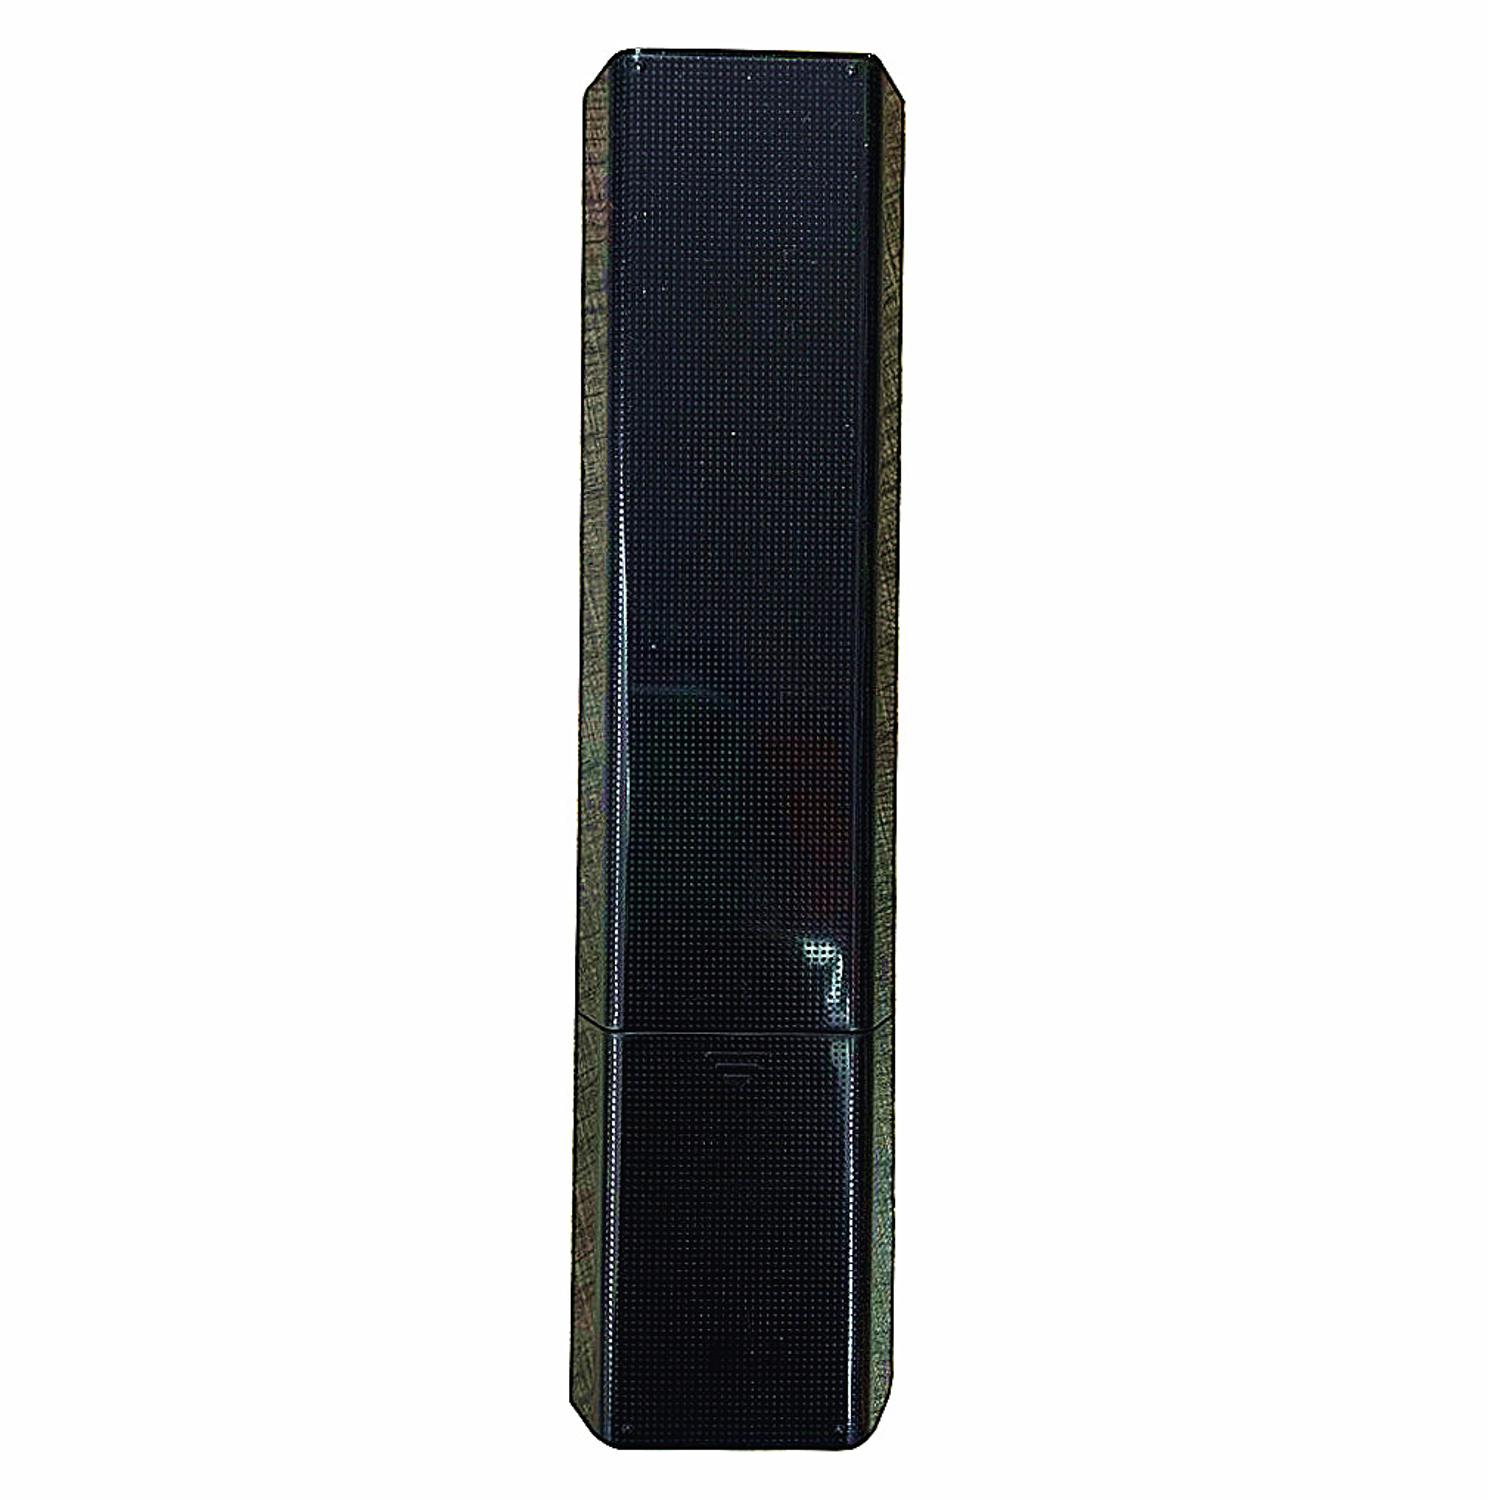 NEW RM-GD030 Replacement for Sony RM-GD033 RM-GD031 RM-GD032 TV Remote Control for KDL55X9000B KDL60W850B KDL26EX550 KDL40EX650